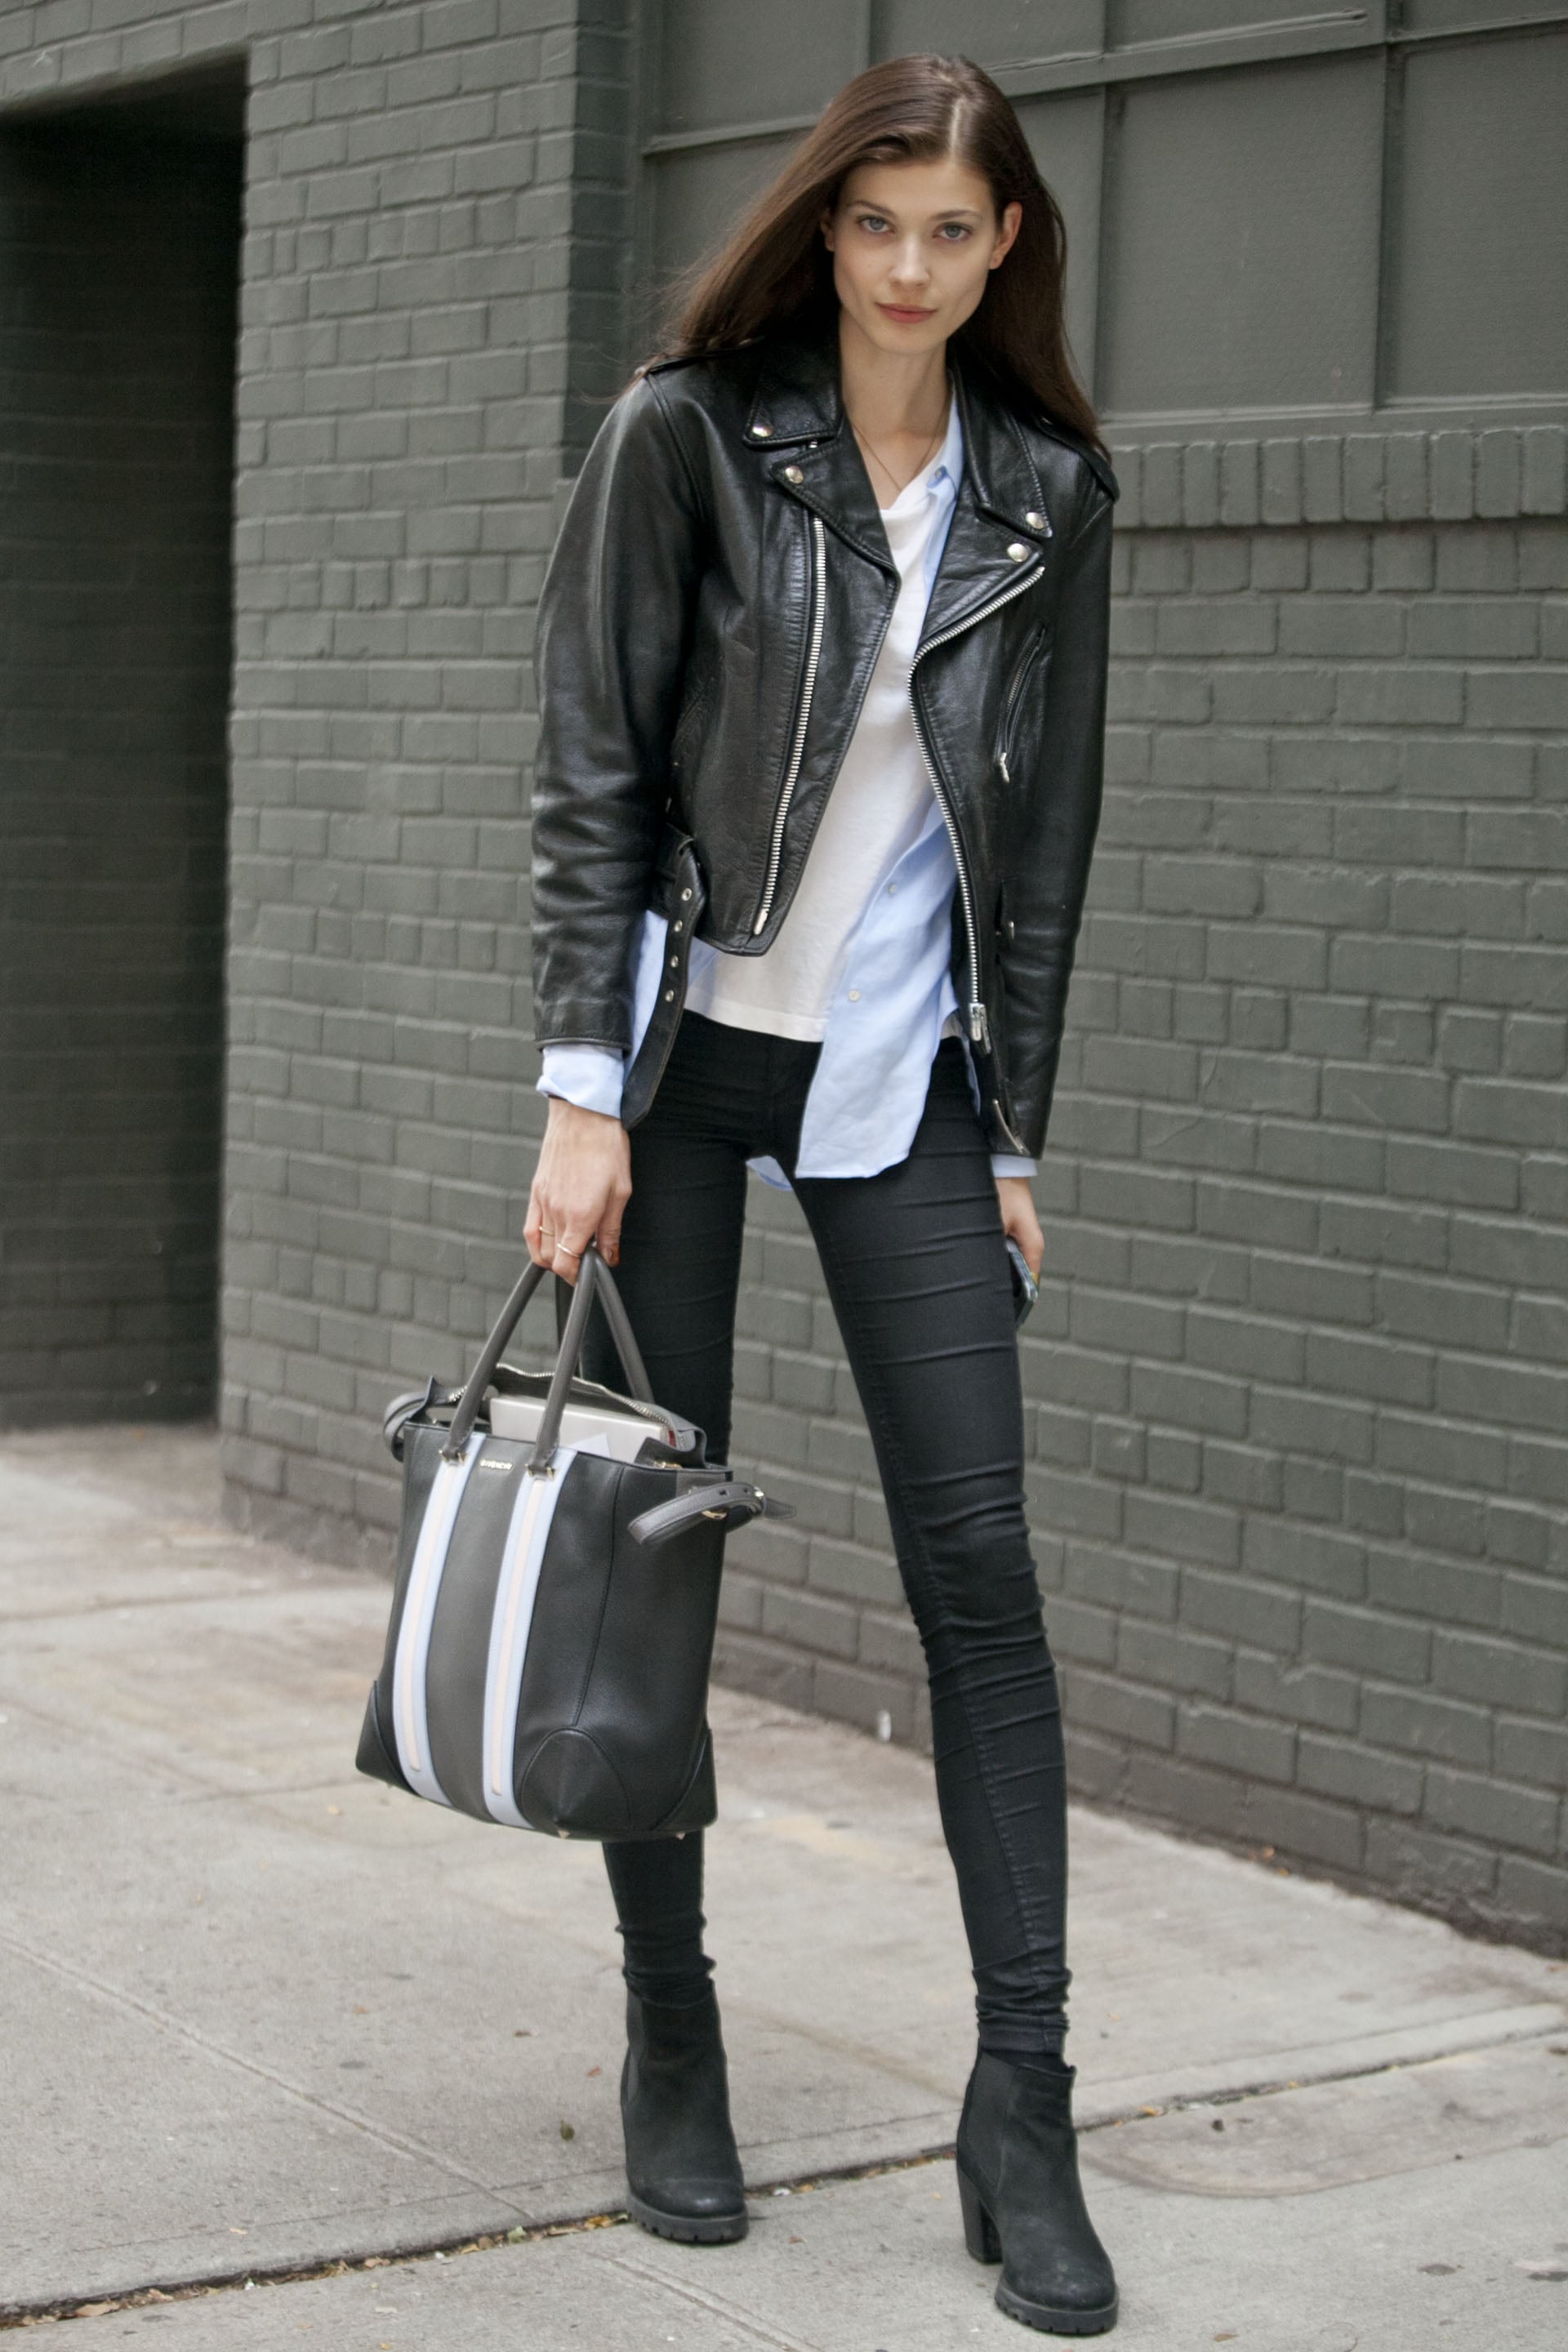 The Model Off Duty Uniform In Action Off The Runway At Nyfw Model Street Style Popsugar Fashion Photo 37